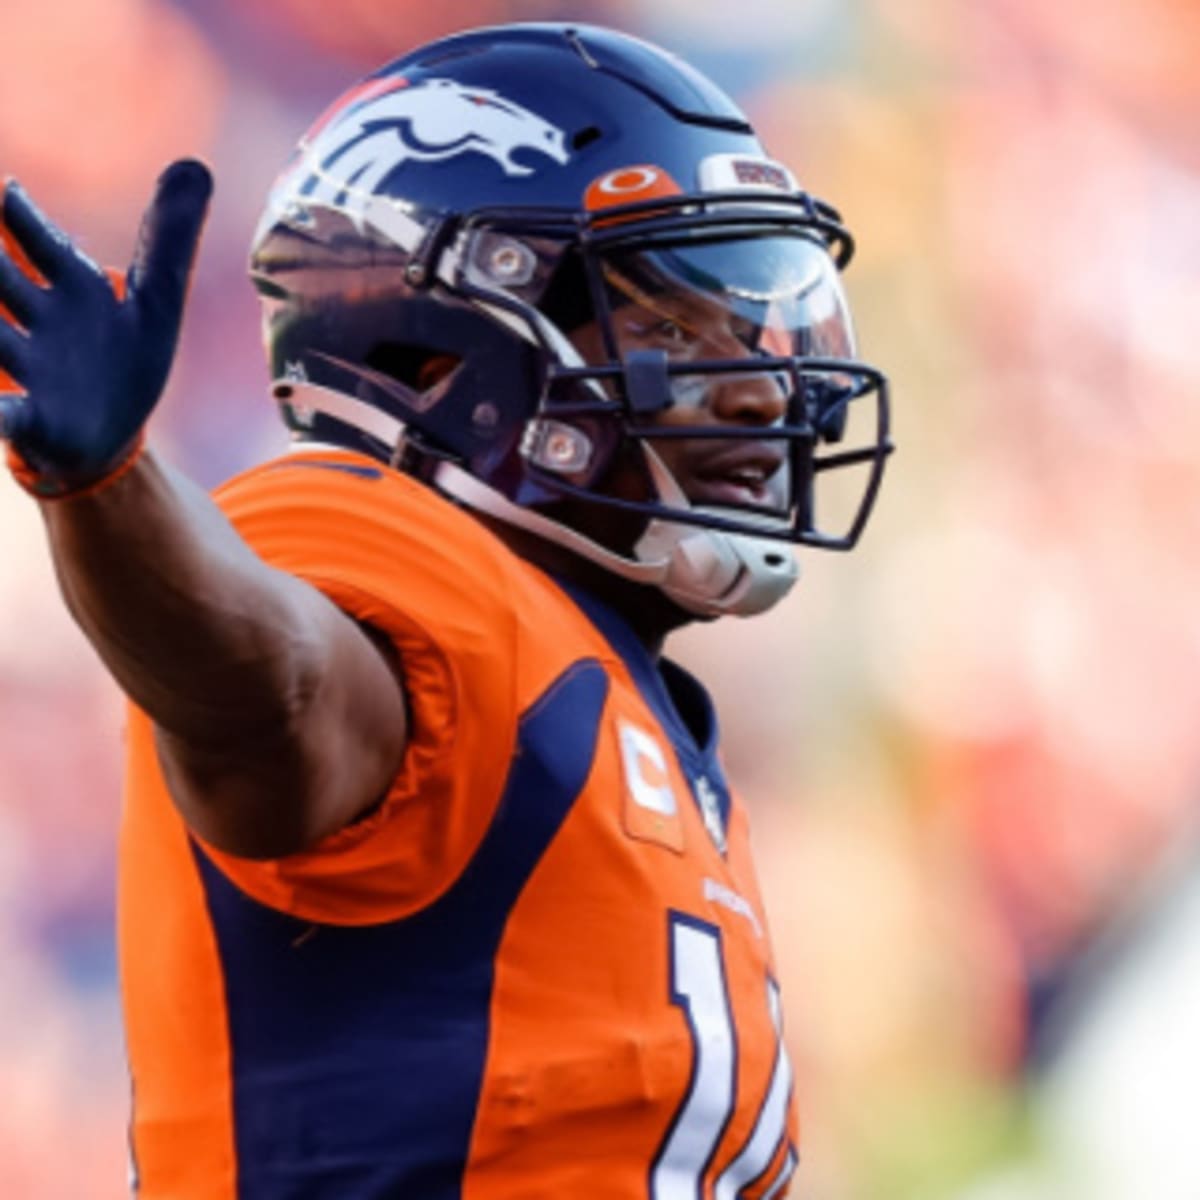 2022 Denver Broncos schedule: Complete schedule and matchup information for  2022 NFL season